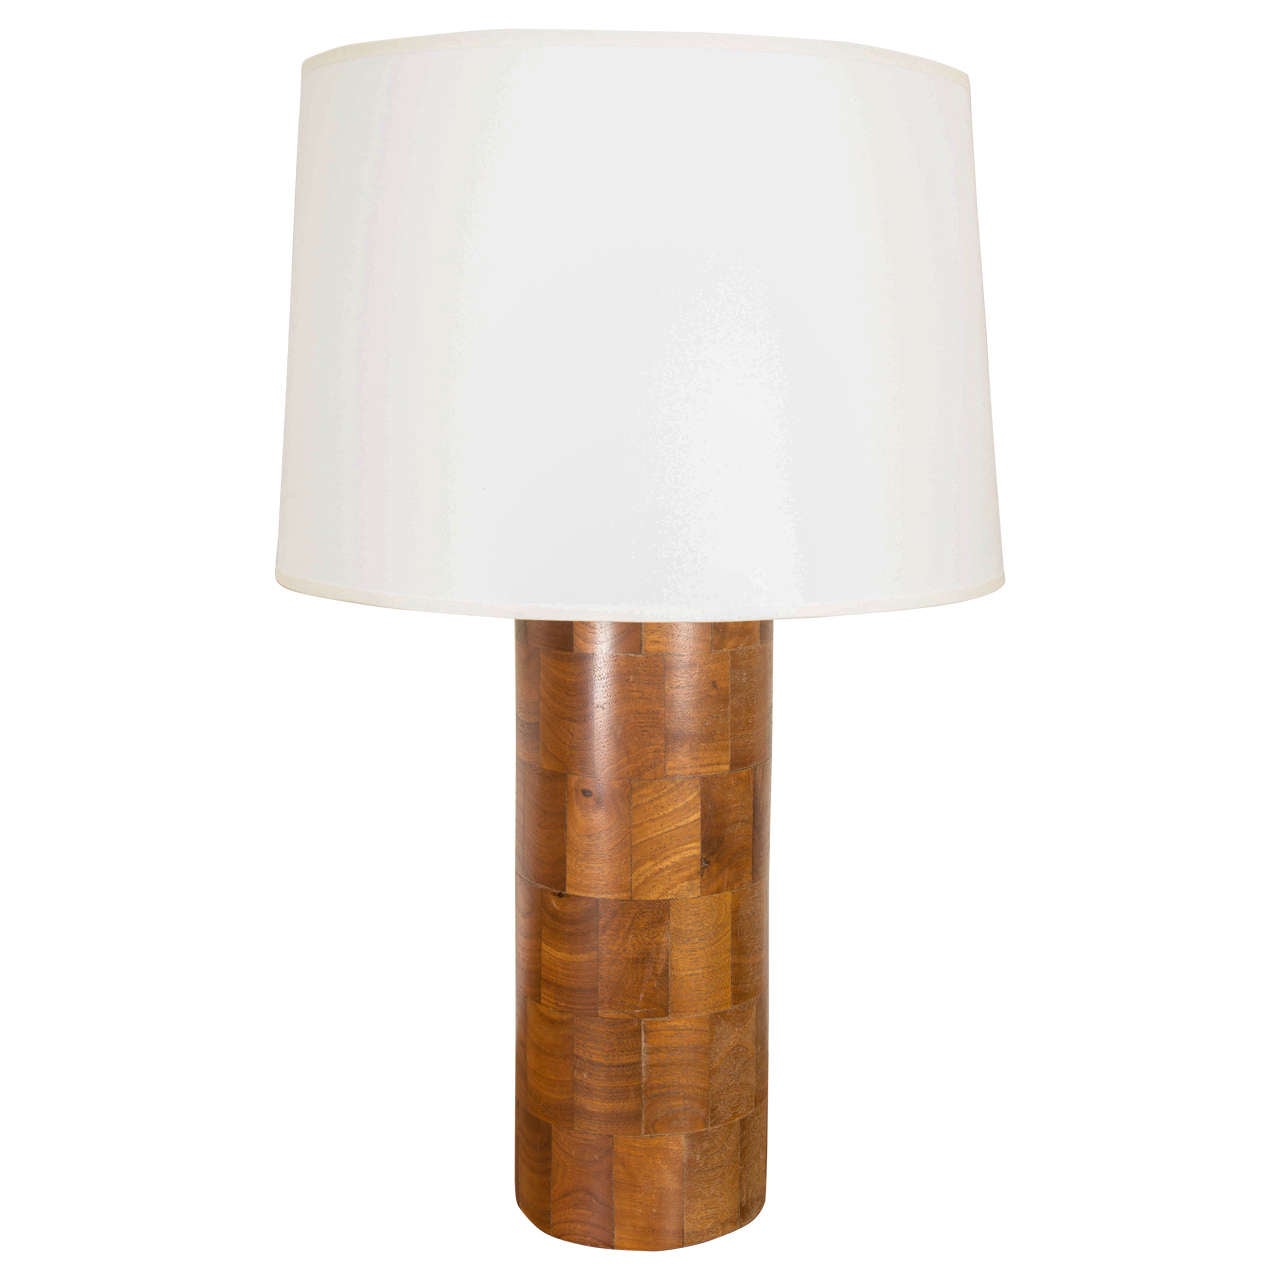 Patchworked Walnut Table Lamp